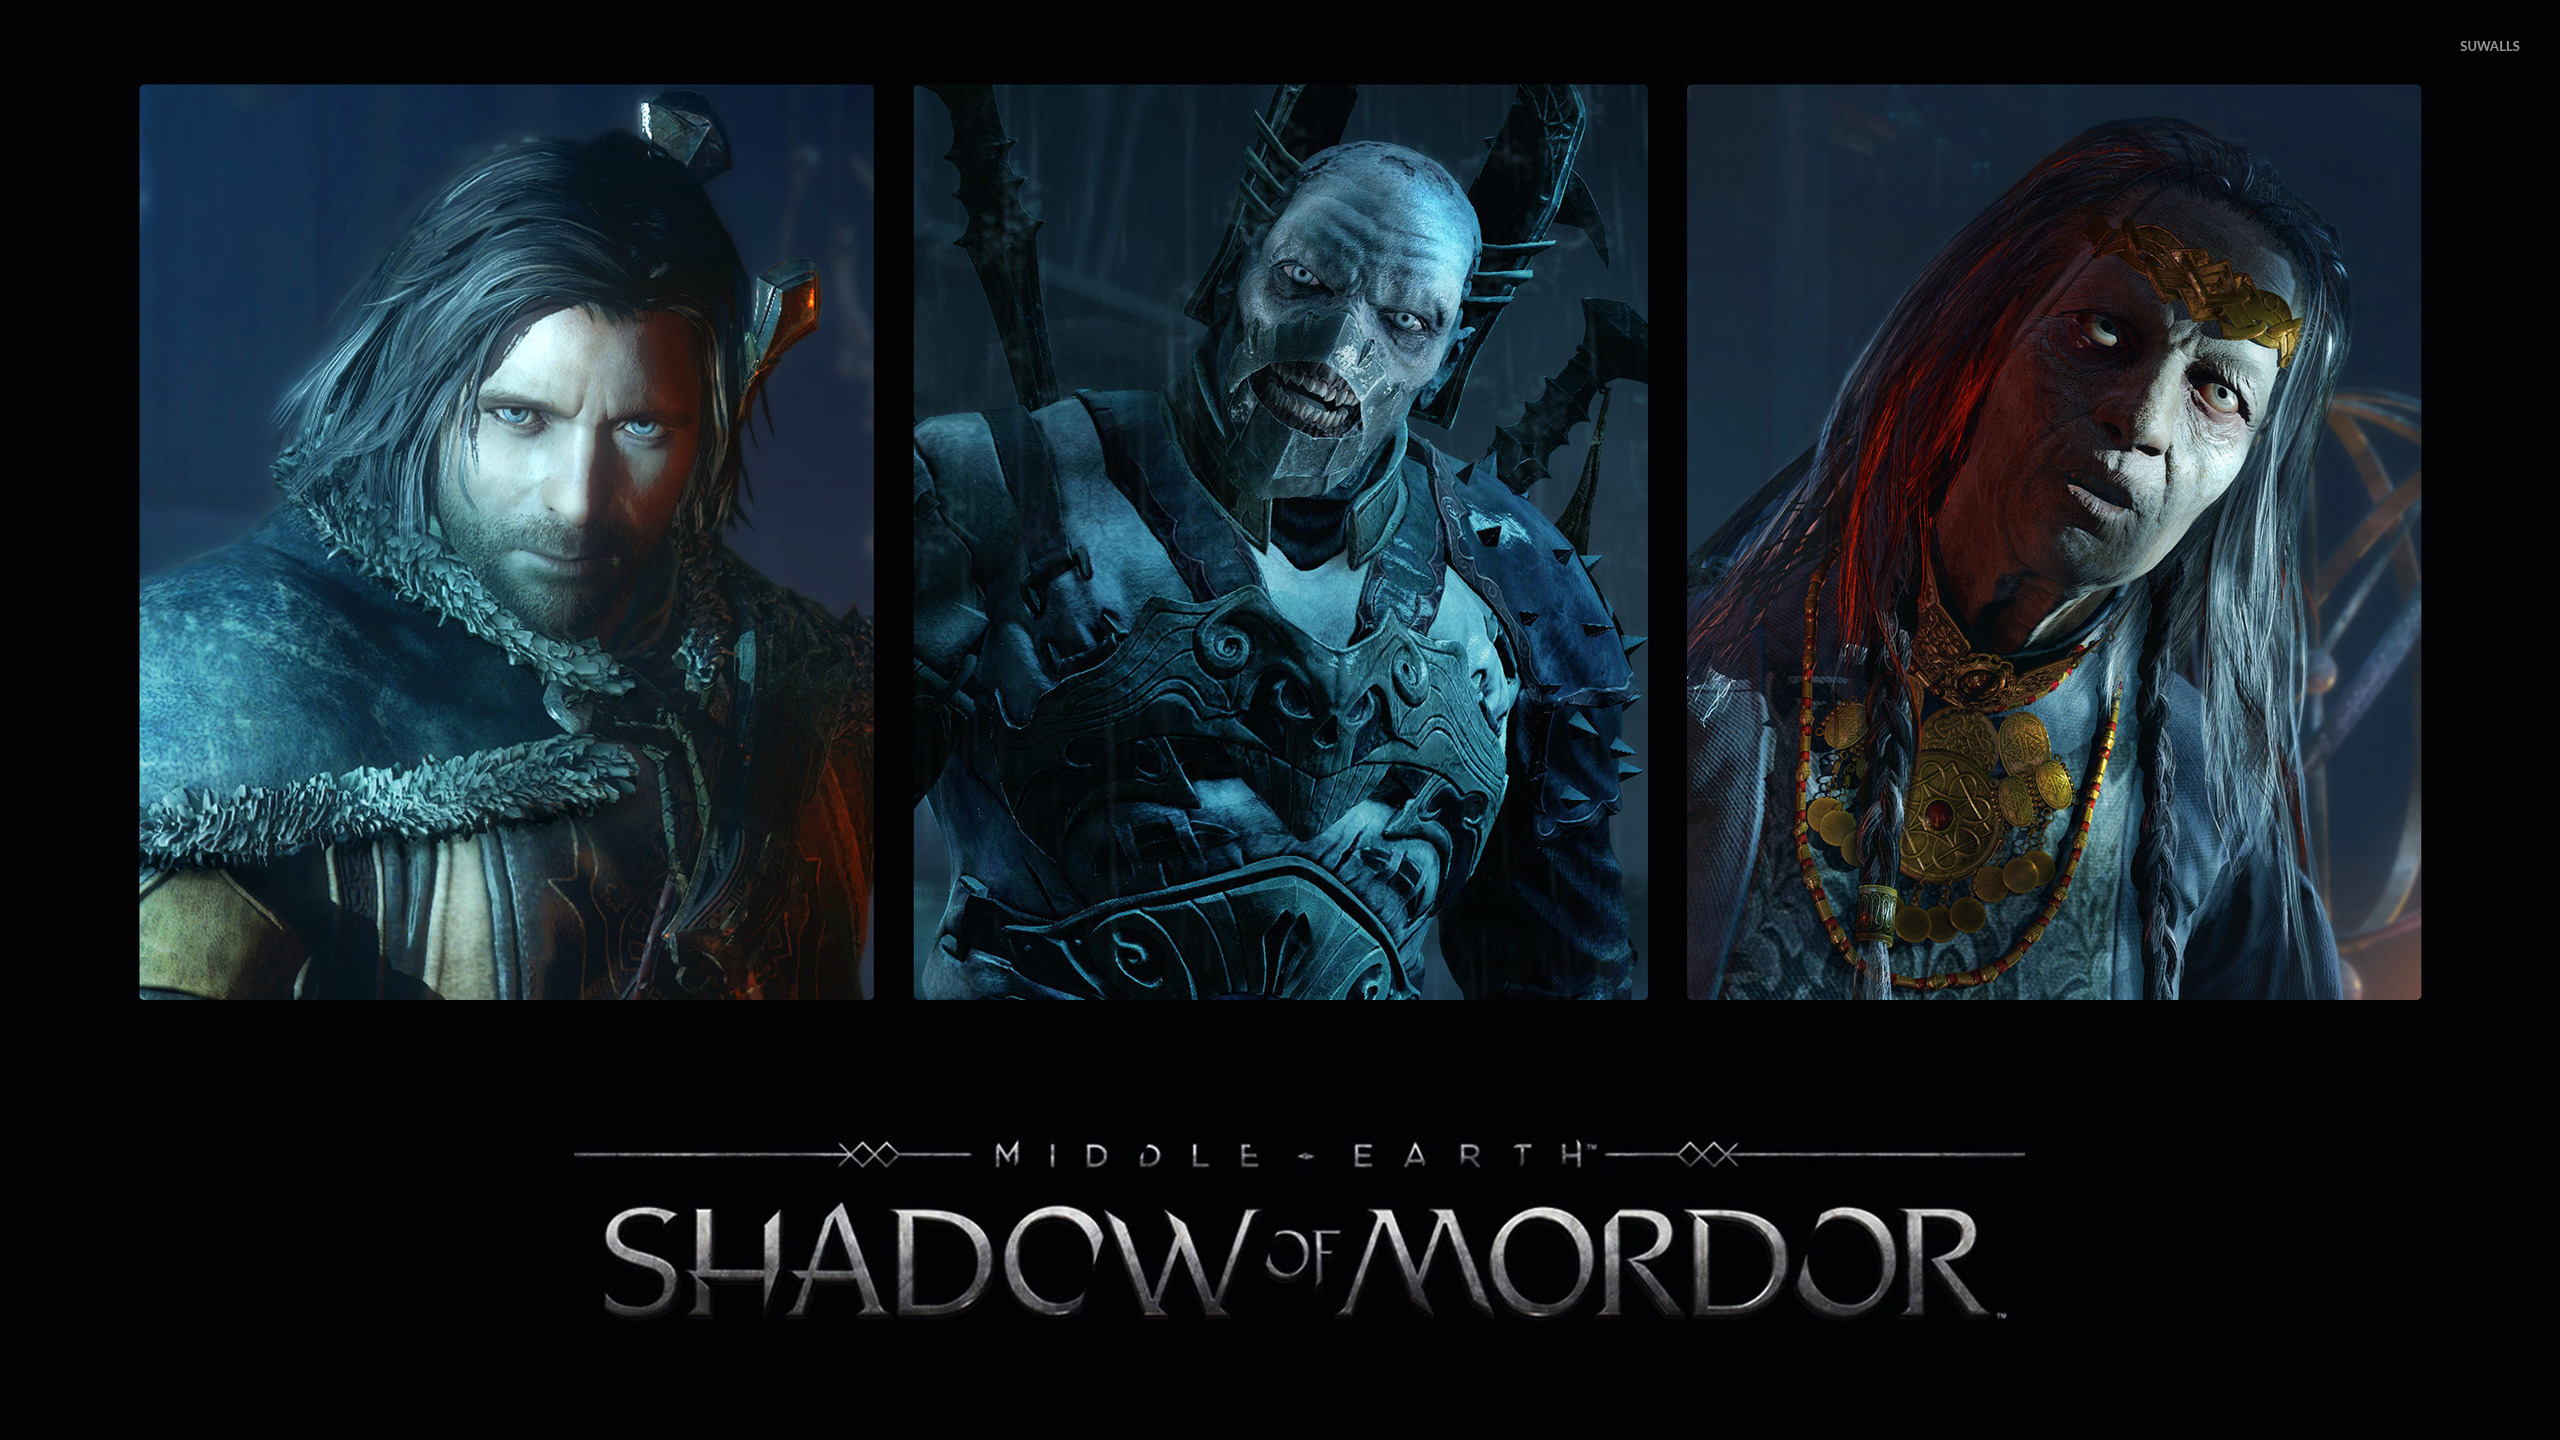 Middle earth Shadow of Mordor [16] wallpaper   Game